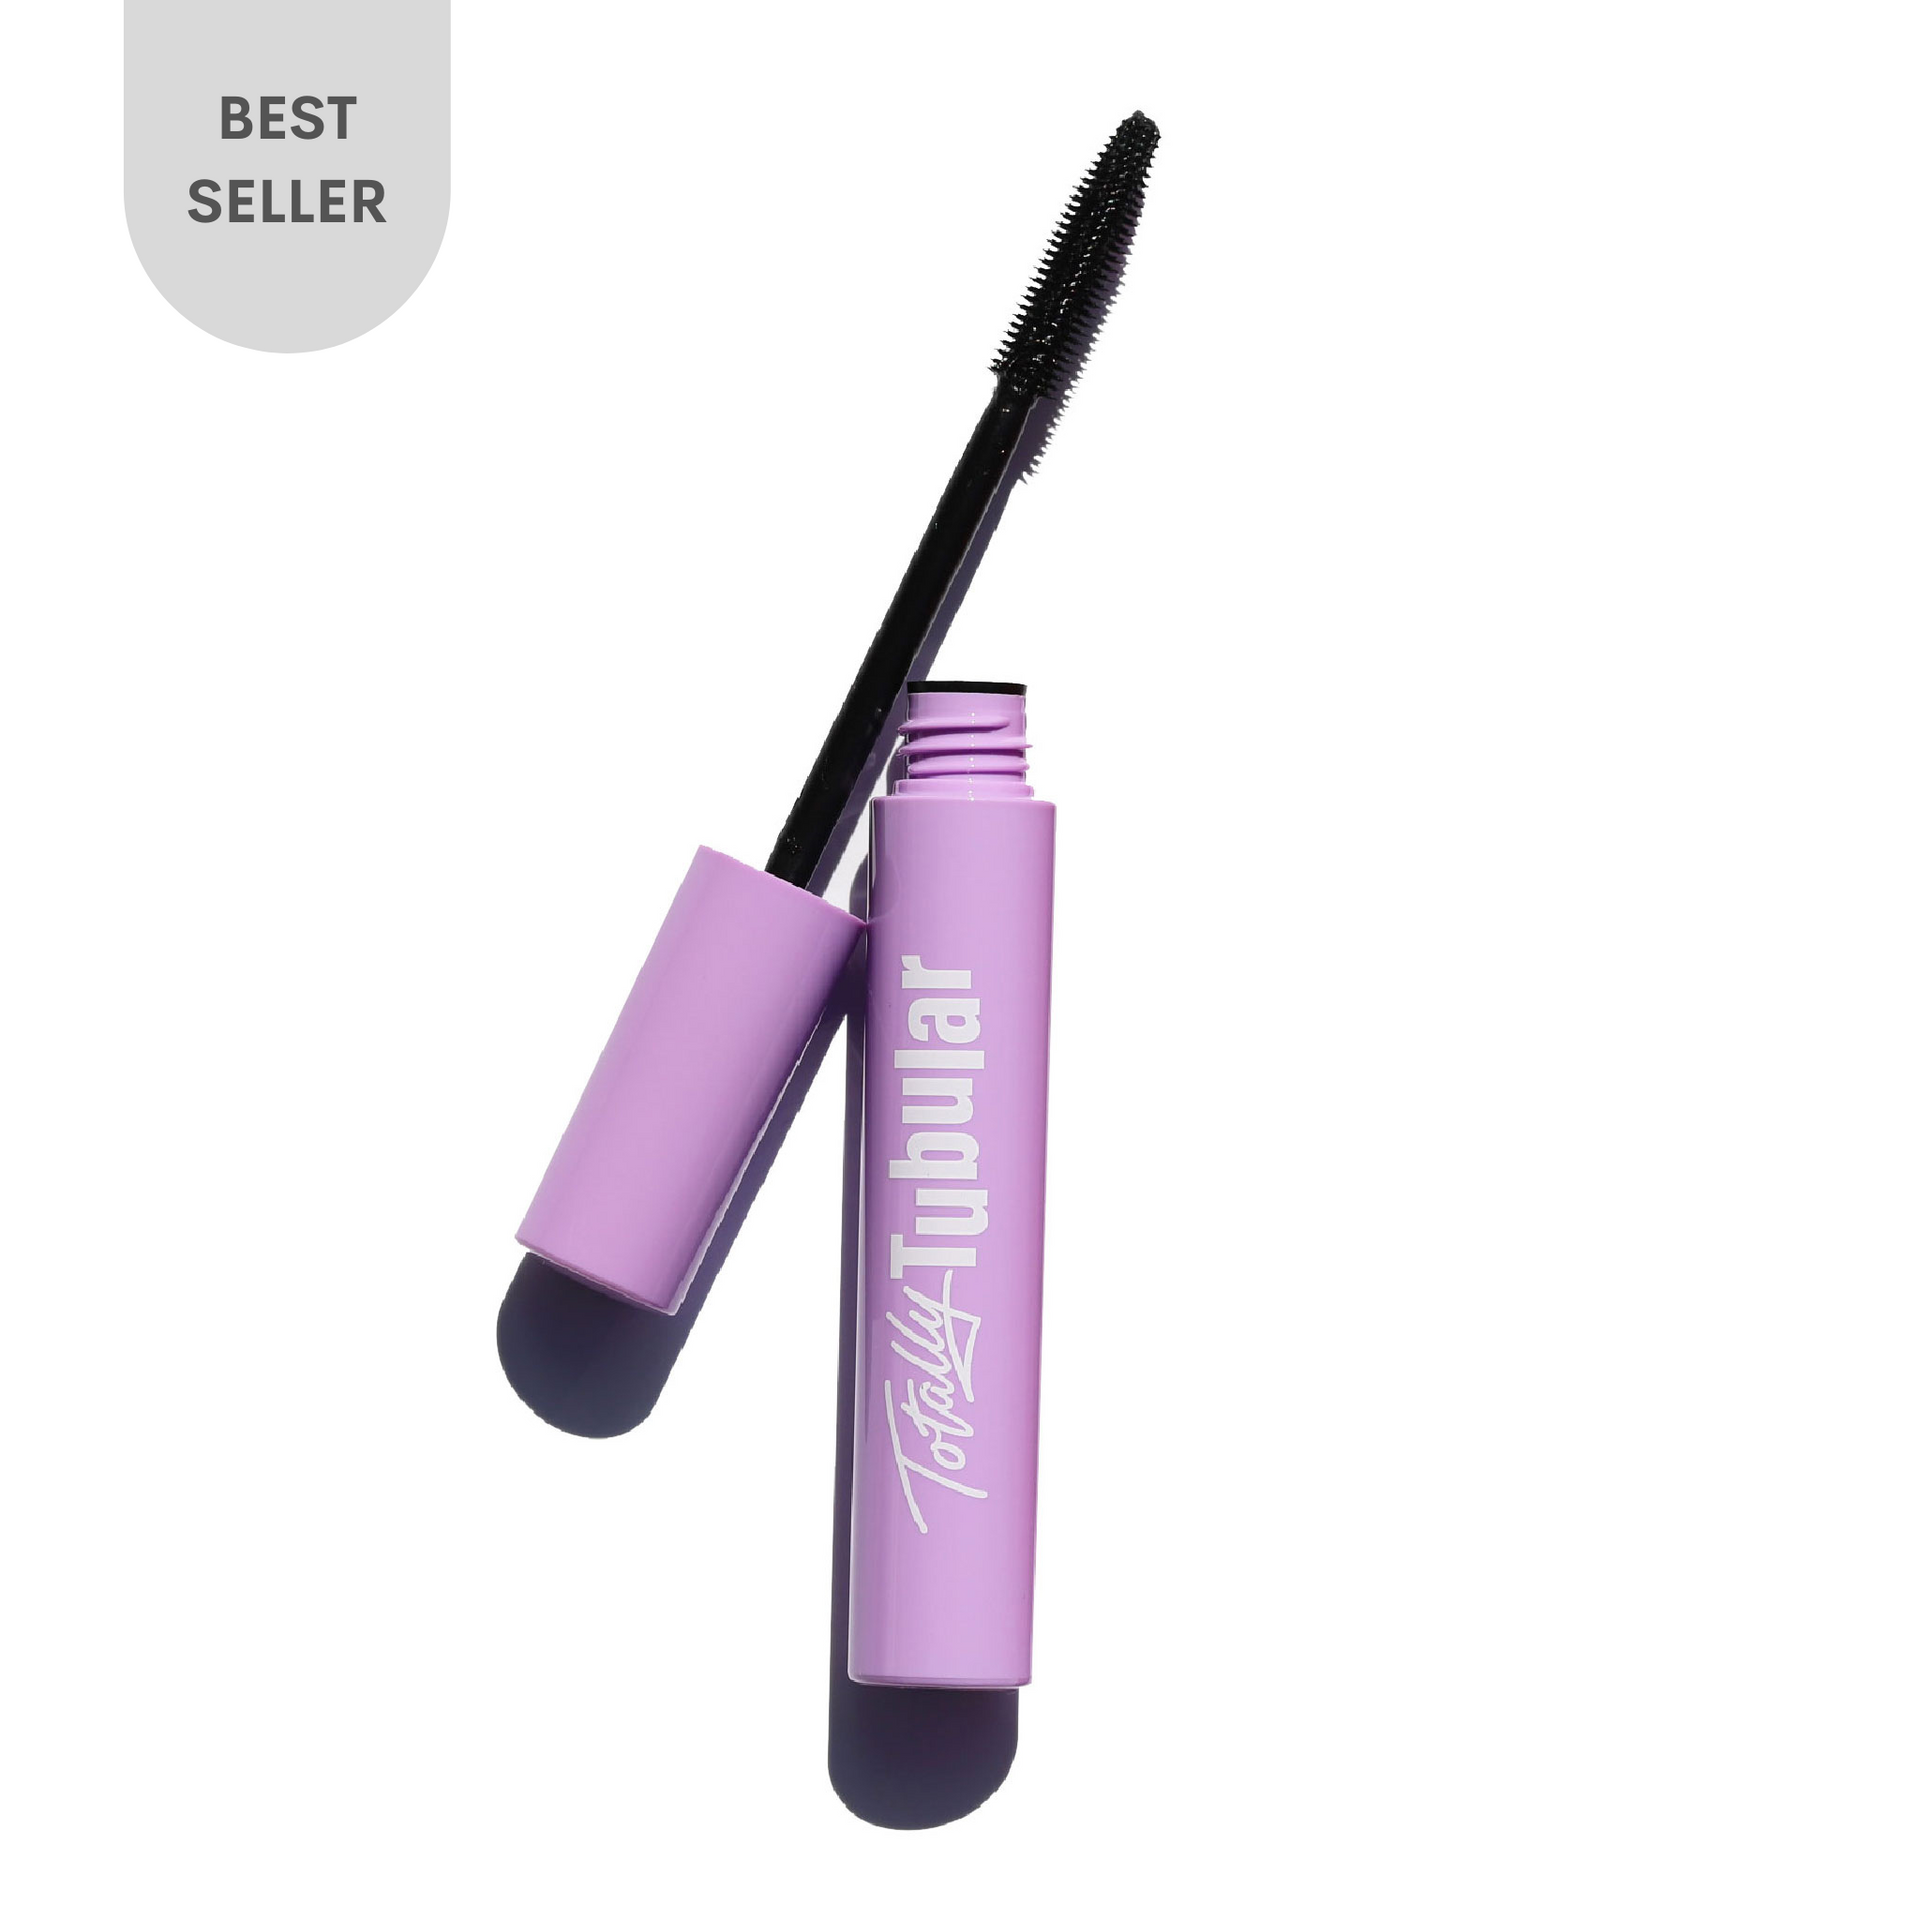 open purple mascara tube with curved black applicator - totally tubular mascara, the ultimate - half caked makeup